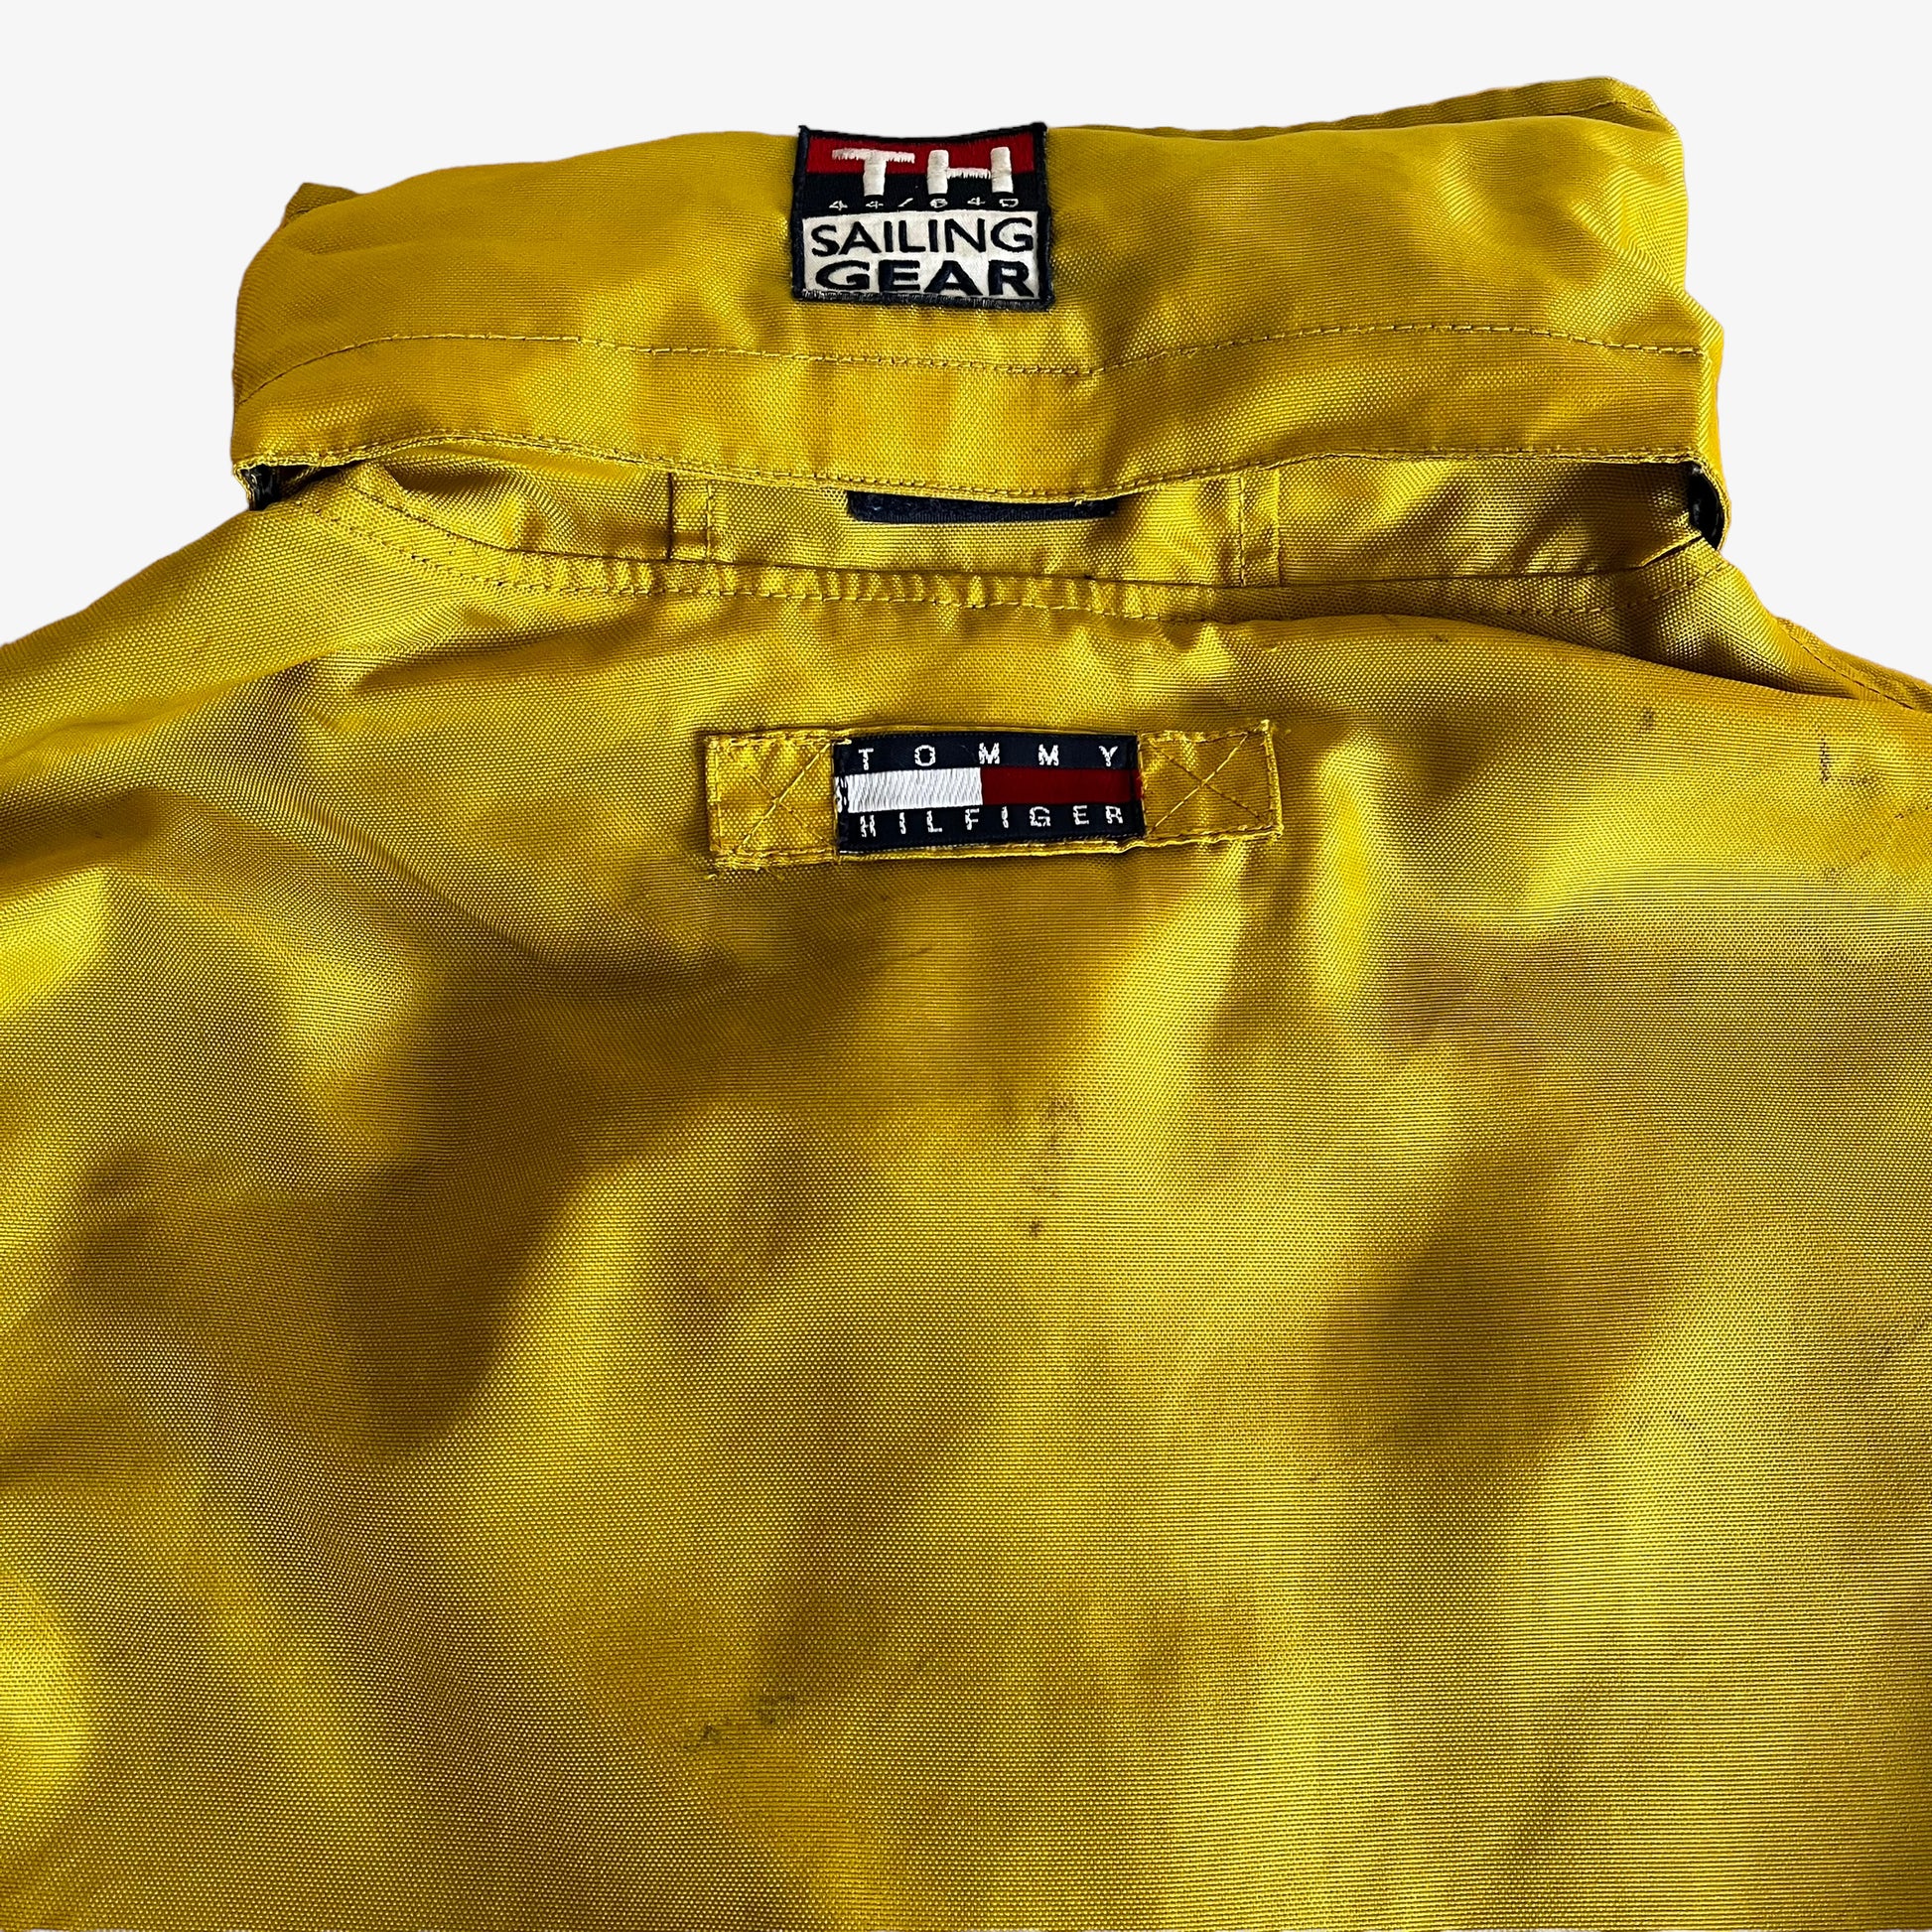 Vintage 90s Tommy Hilfiger Yellow Sailing Gear Jacket With Hook Fasteners Back Logo - Casspios Dream